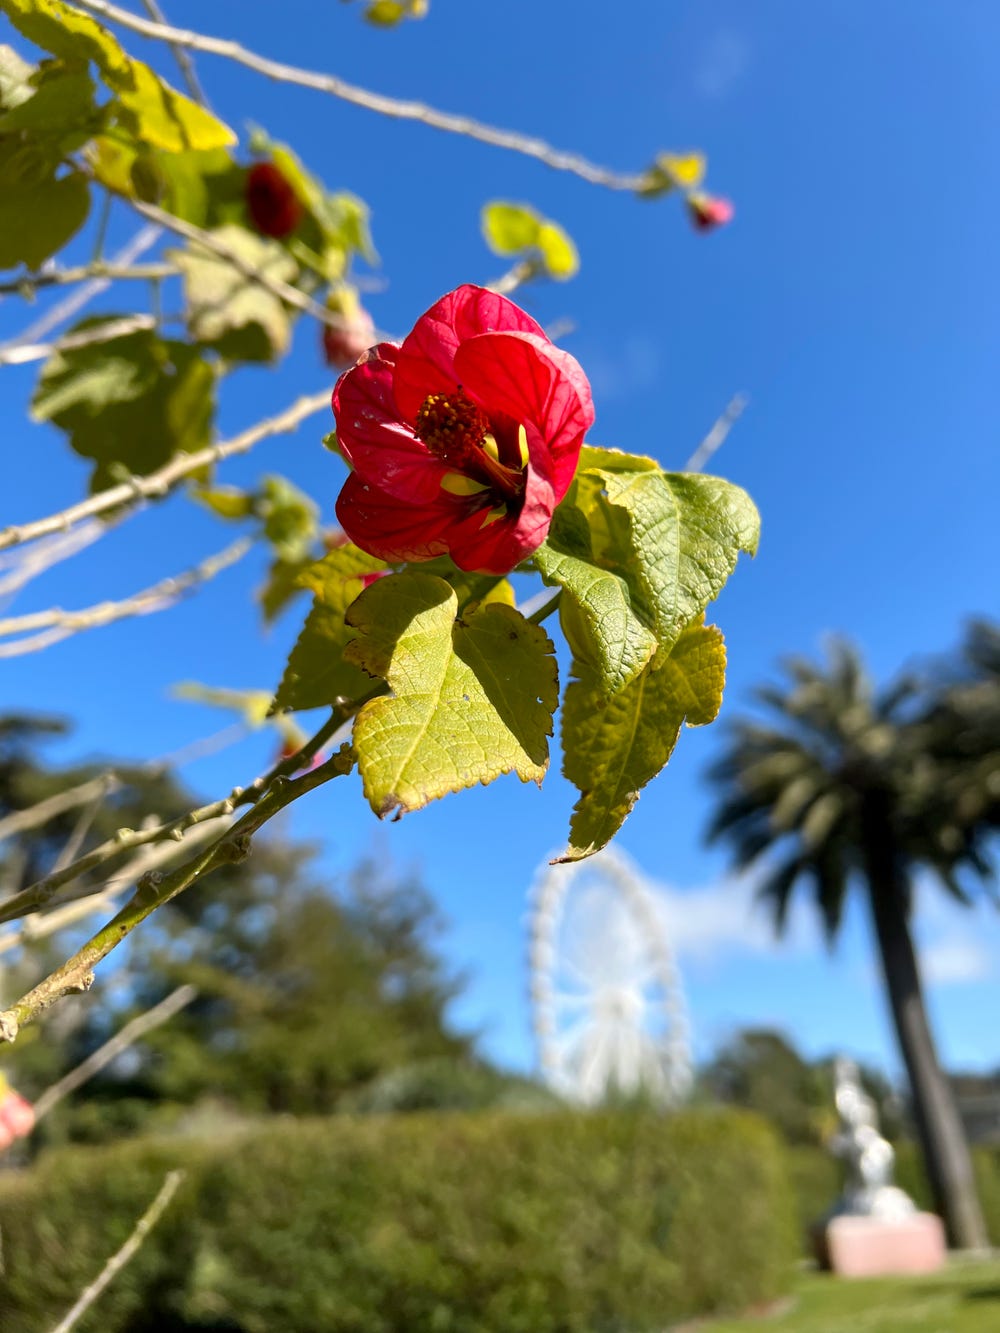 Pink flower against a brilliant blue sky in the Garden of Enchantment at the de Young museum